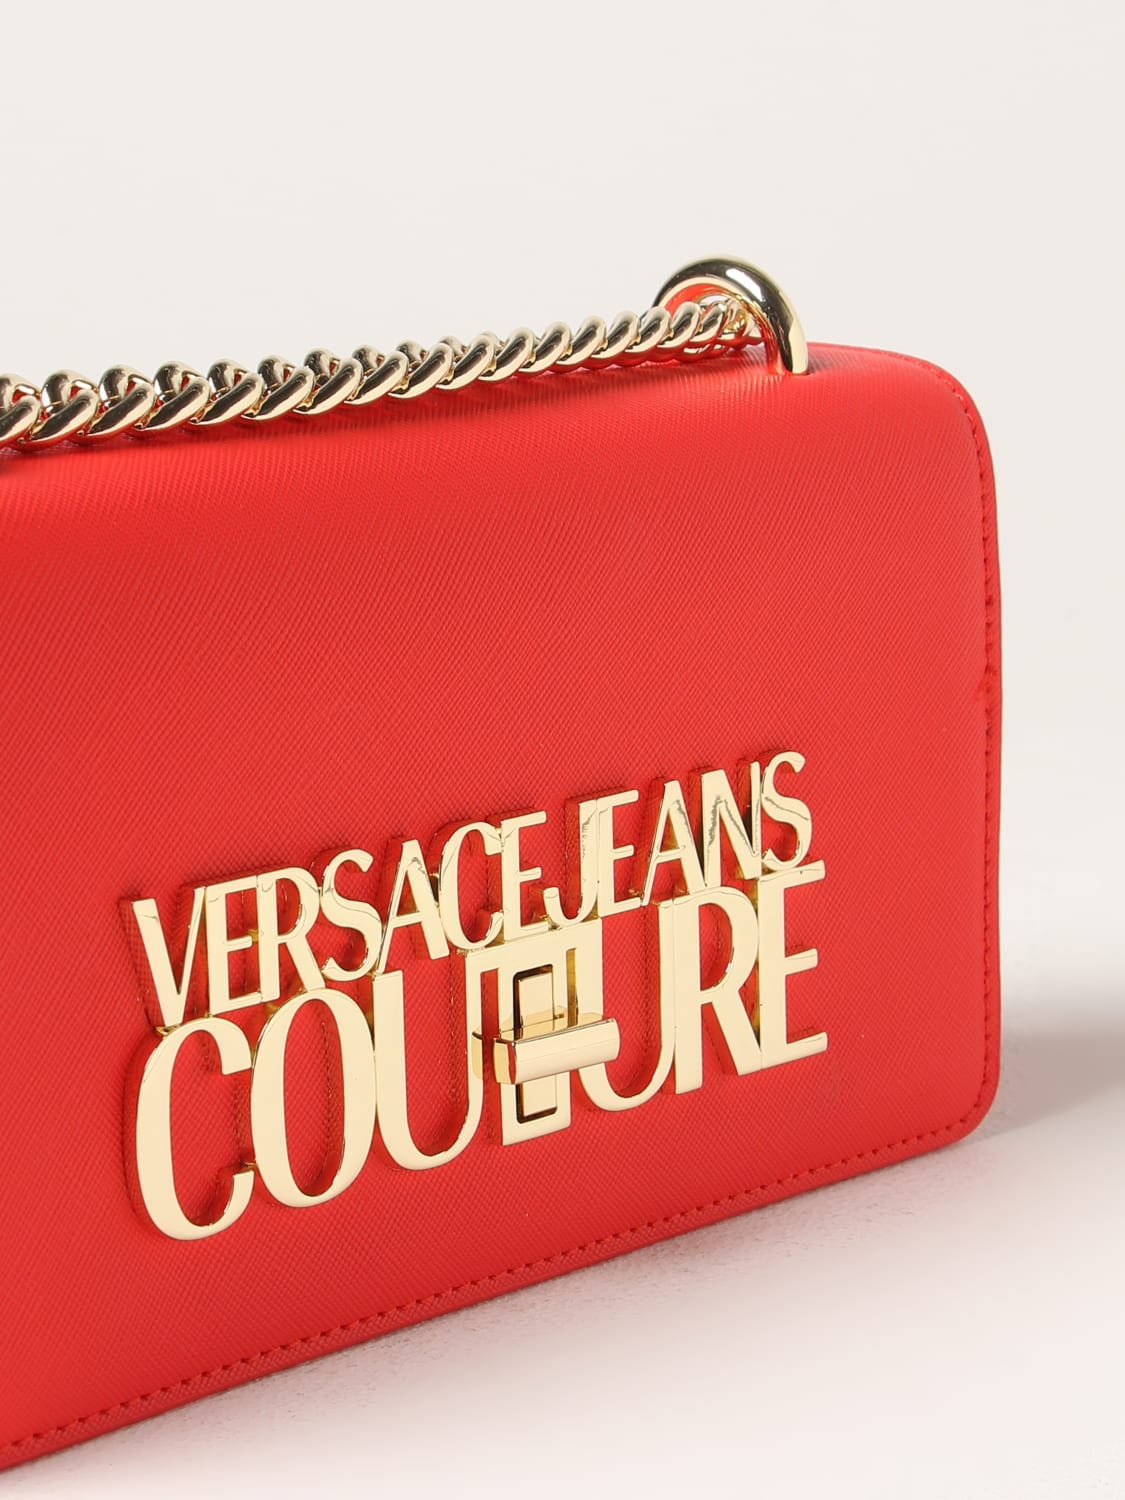 VERSACE JEANS COUTURE ショルダーバッグ レッド